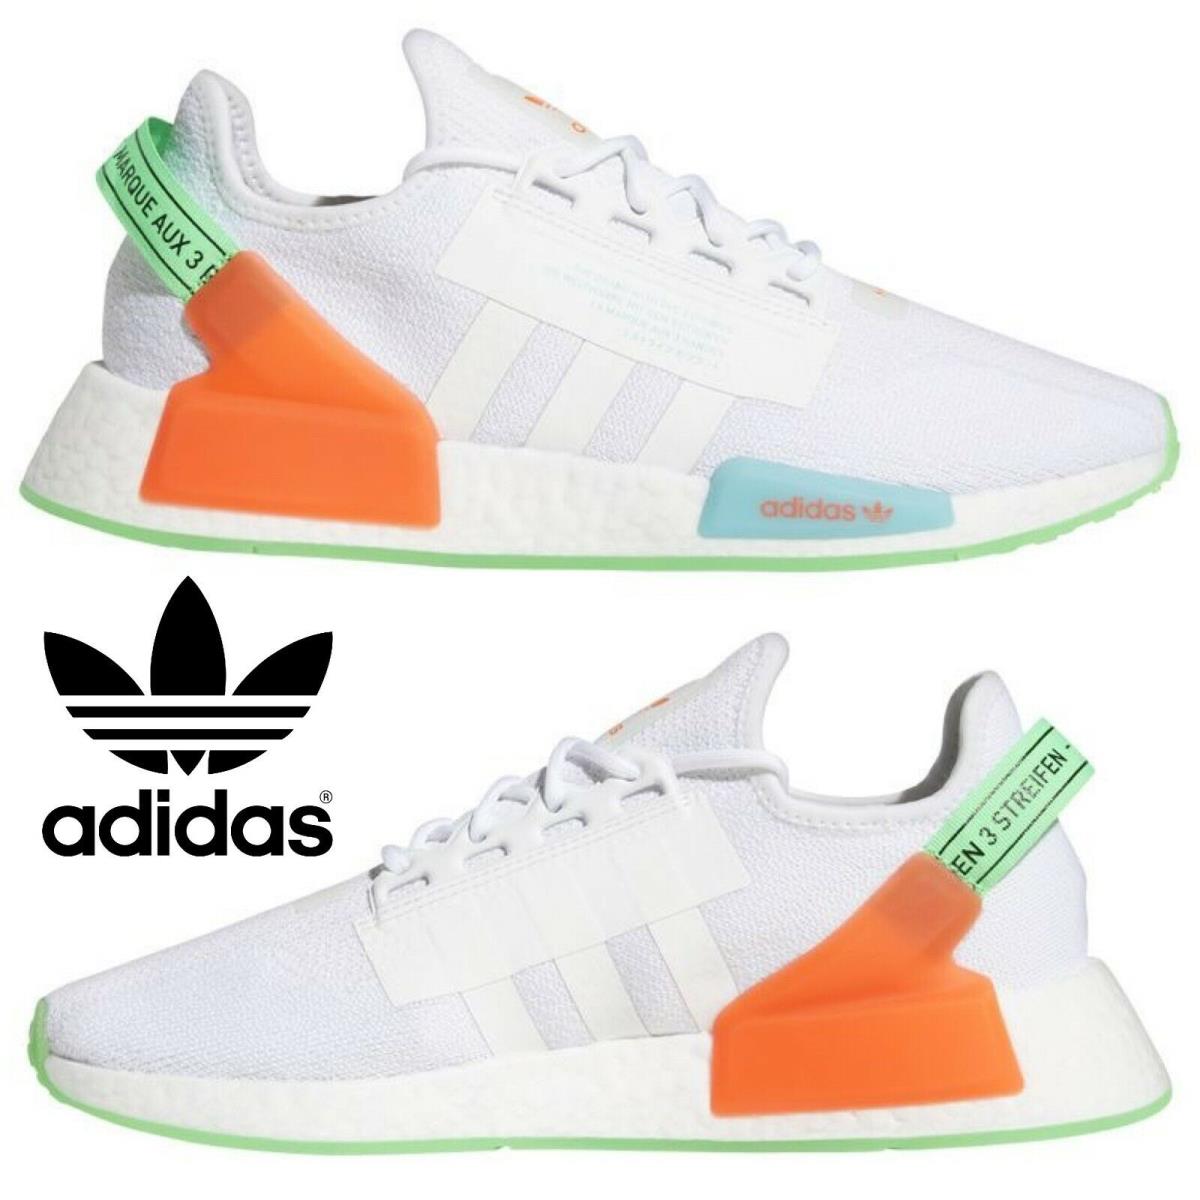 Adidas Originals Nmd R1 V2 Men`s Sneakers Running Shoes Gym Casual Sport White